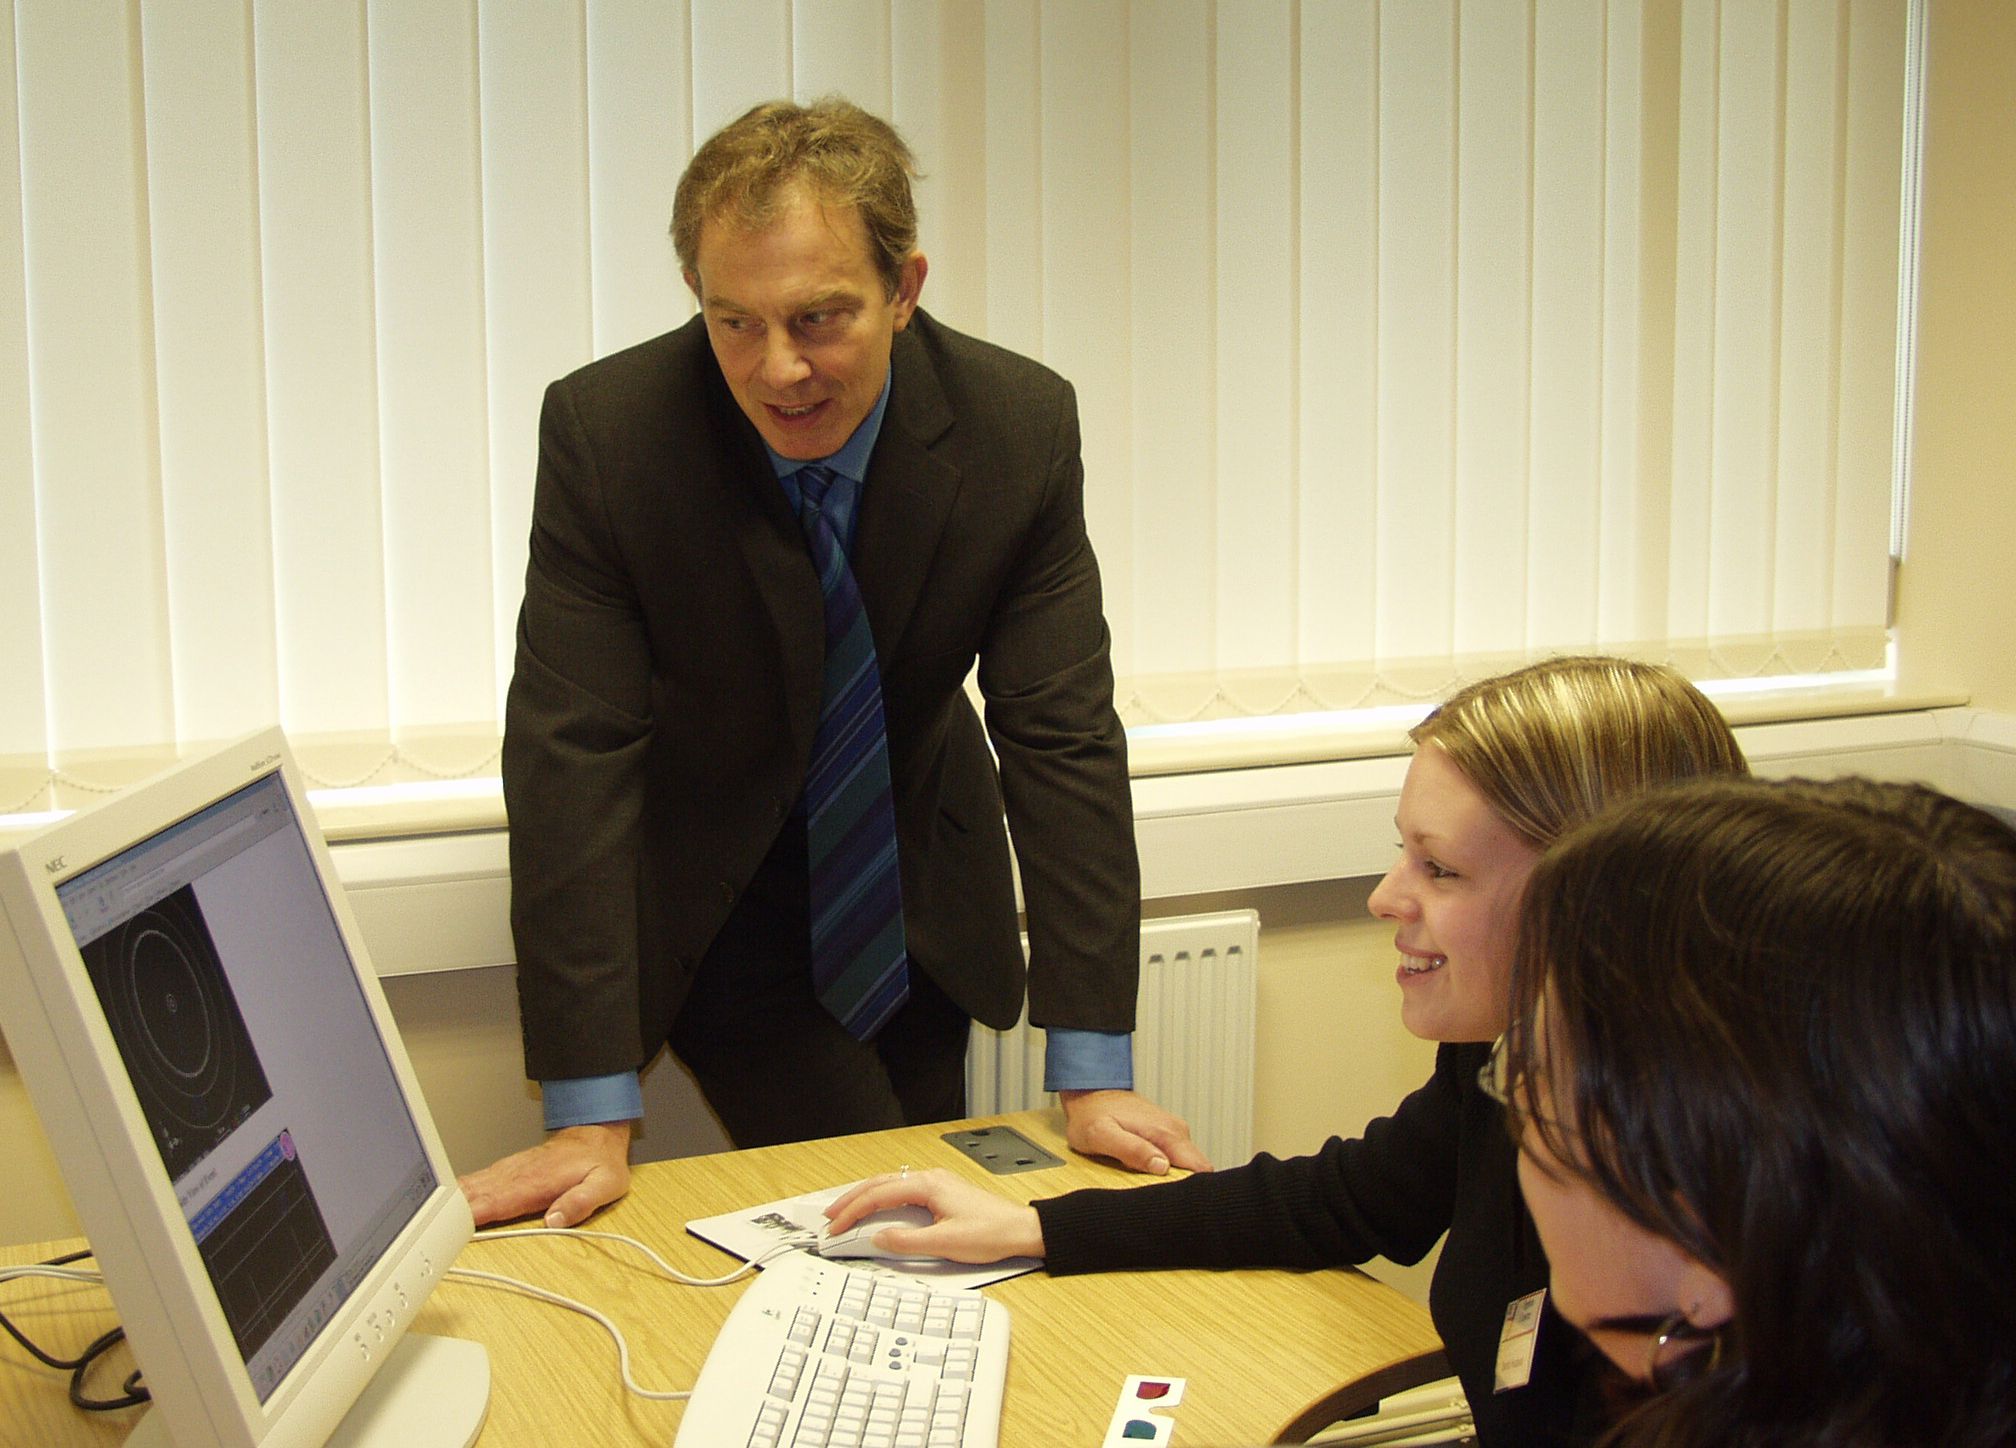 Tony Blair meets students at work on a computer on a visit to the new Ogden East building